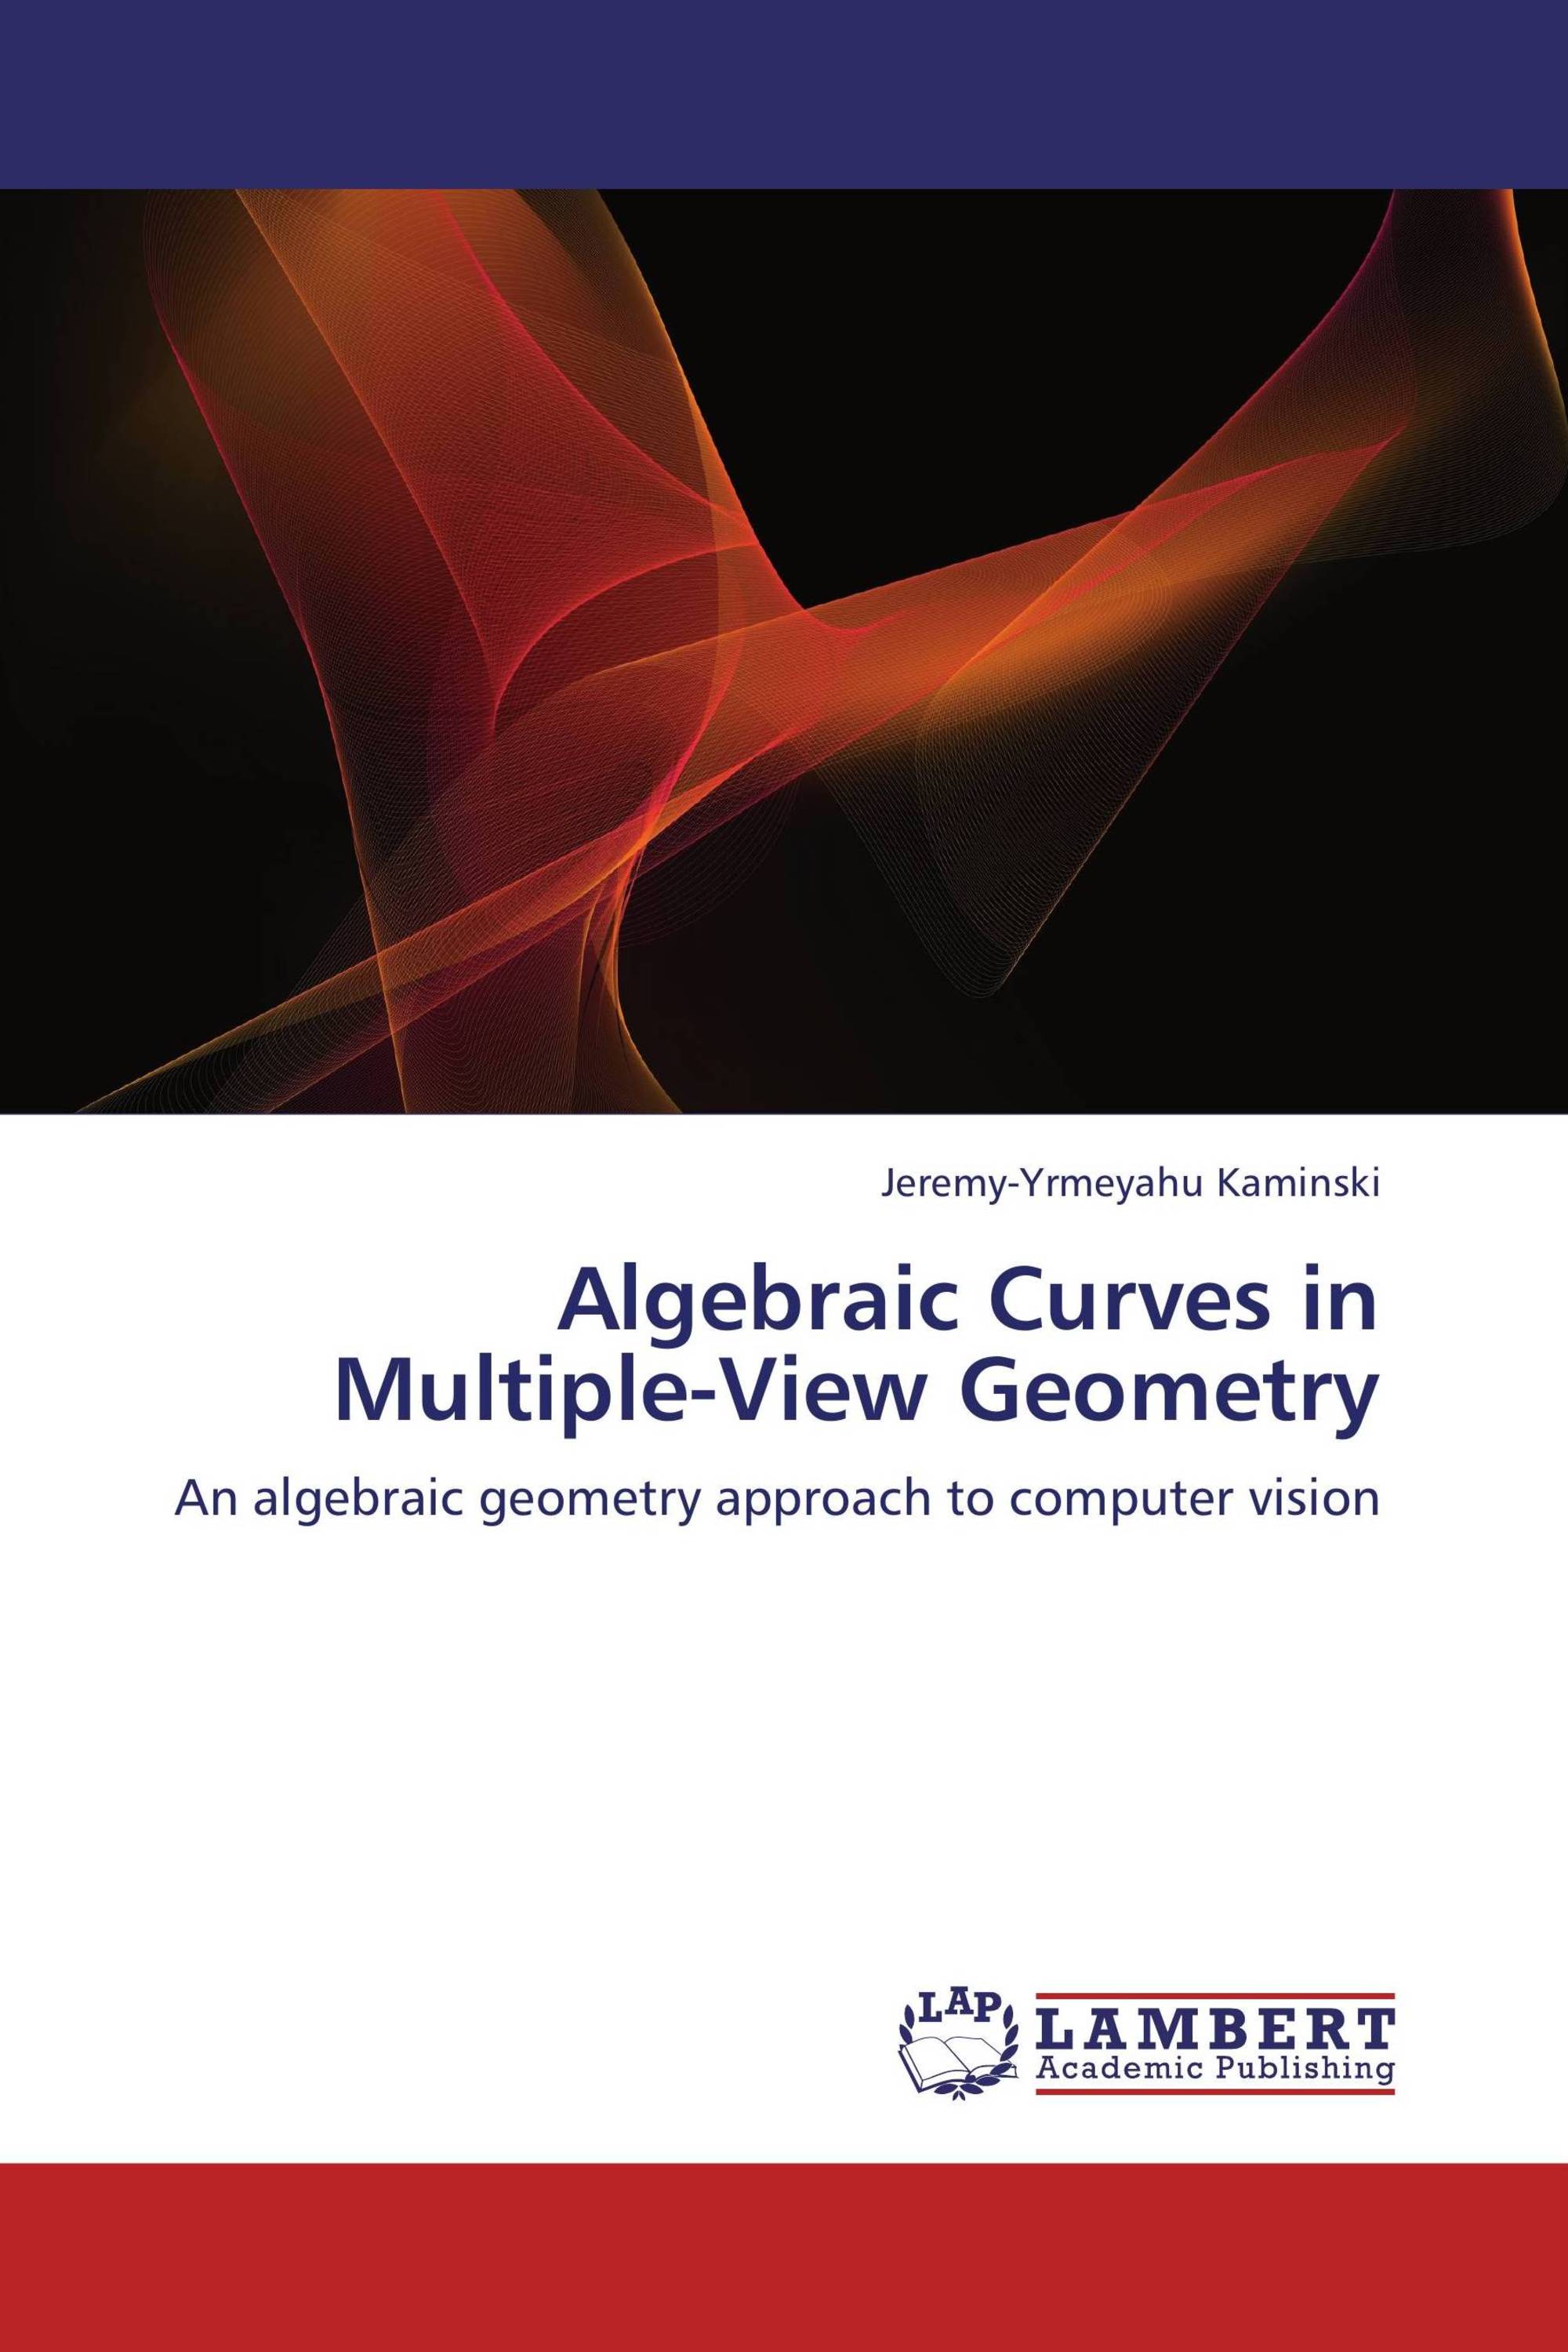 research work on geometry